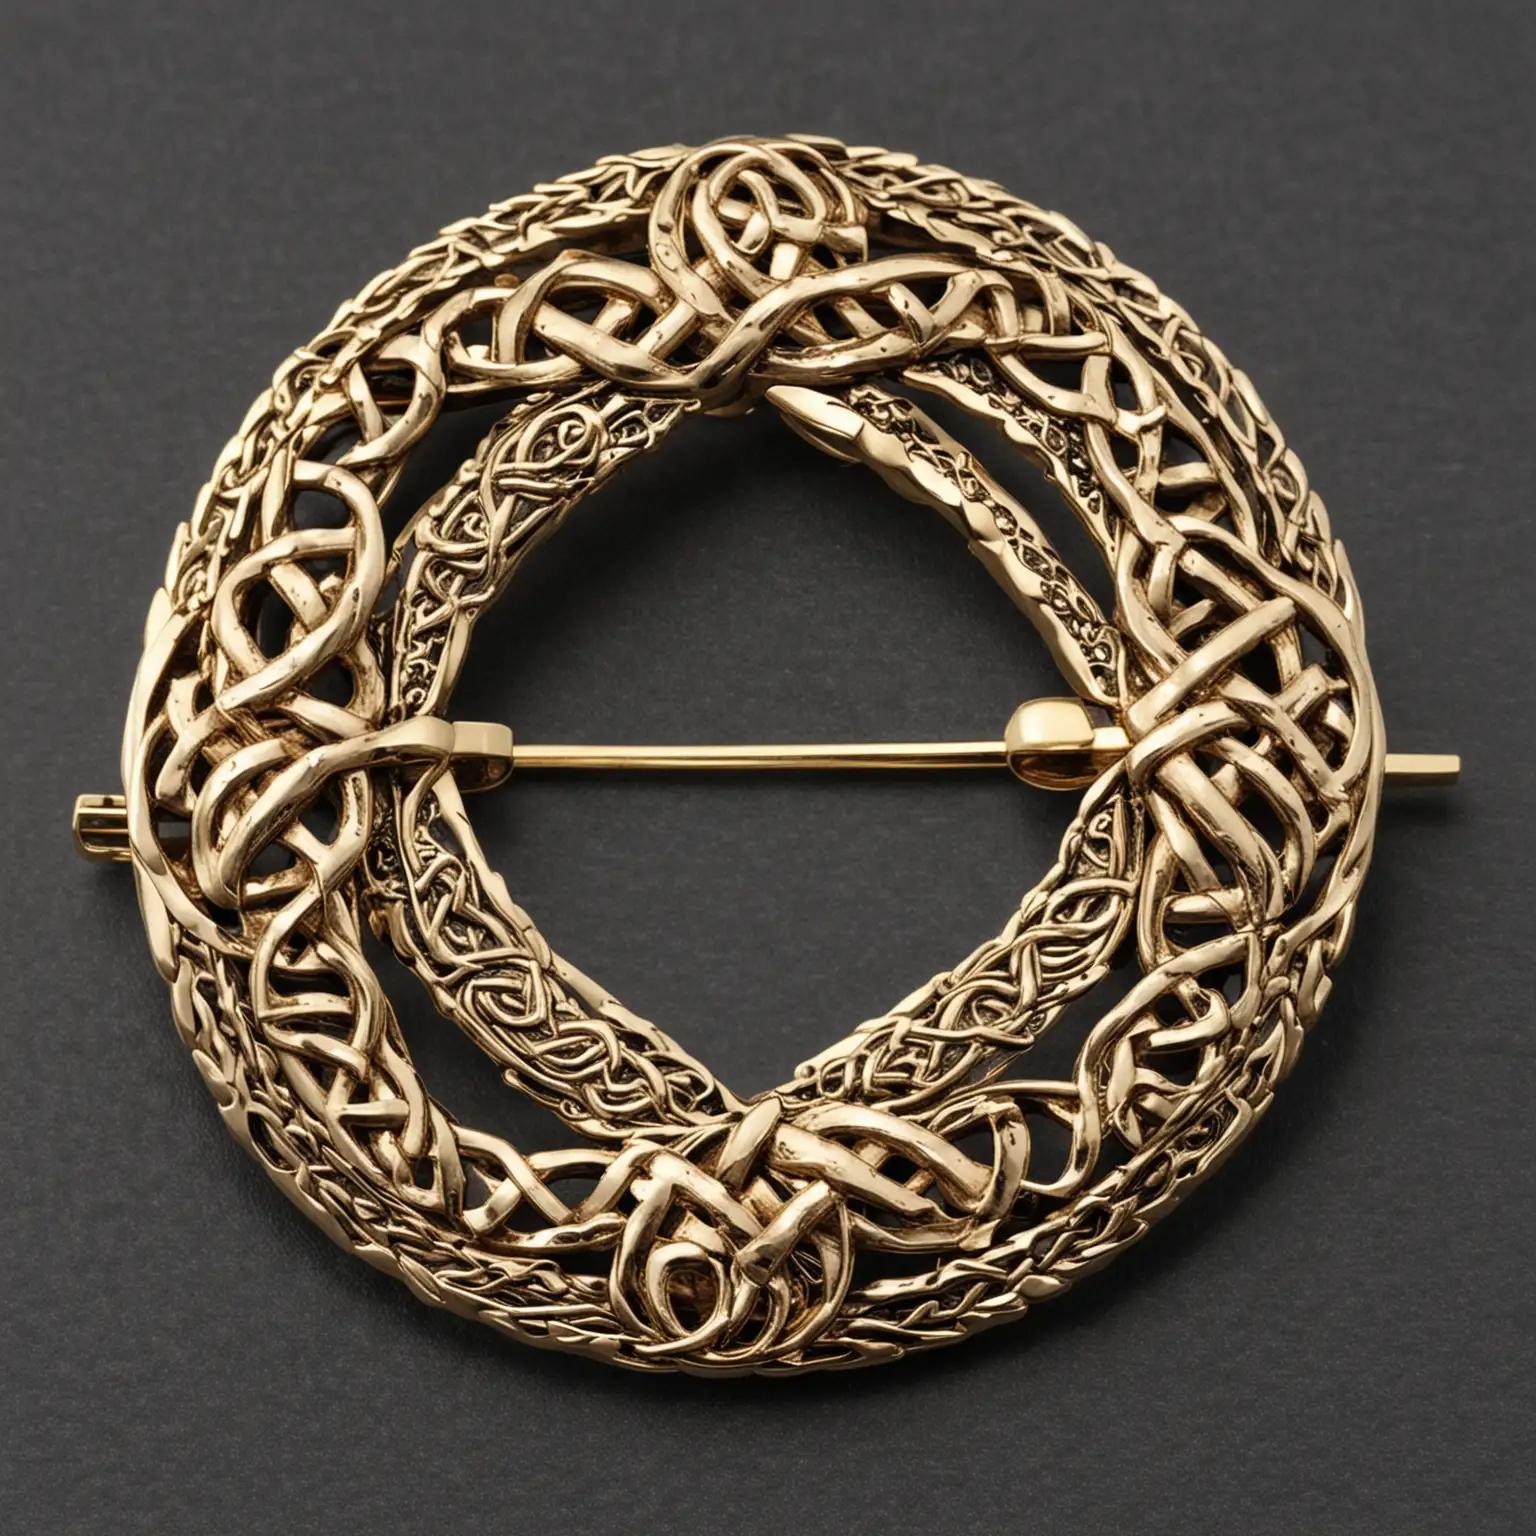 Celtic brooch very detailed - all gold